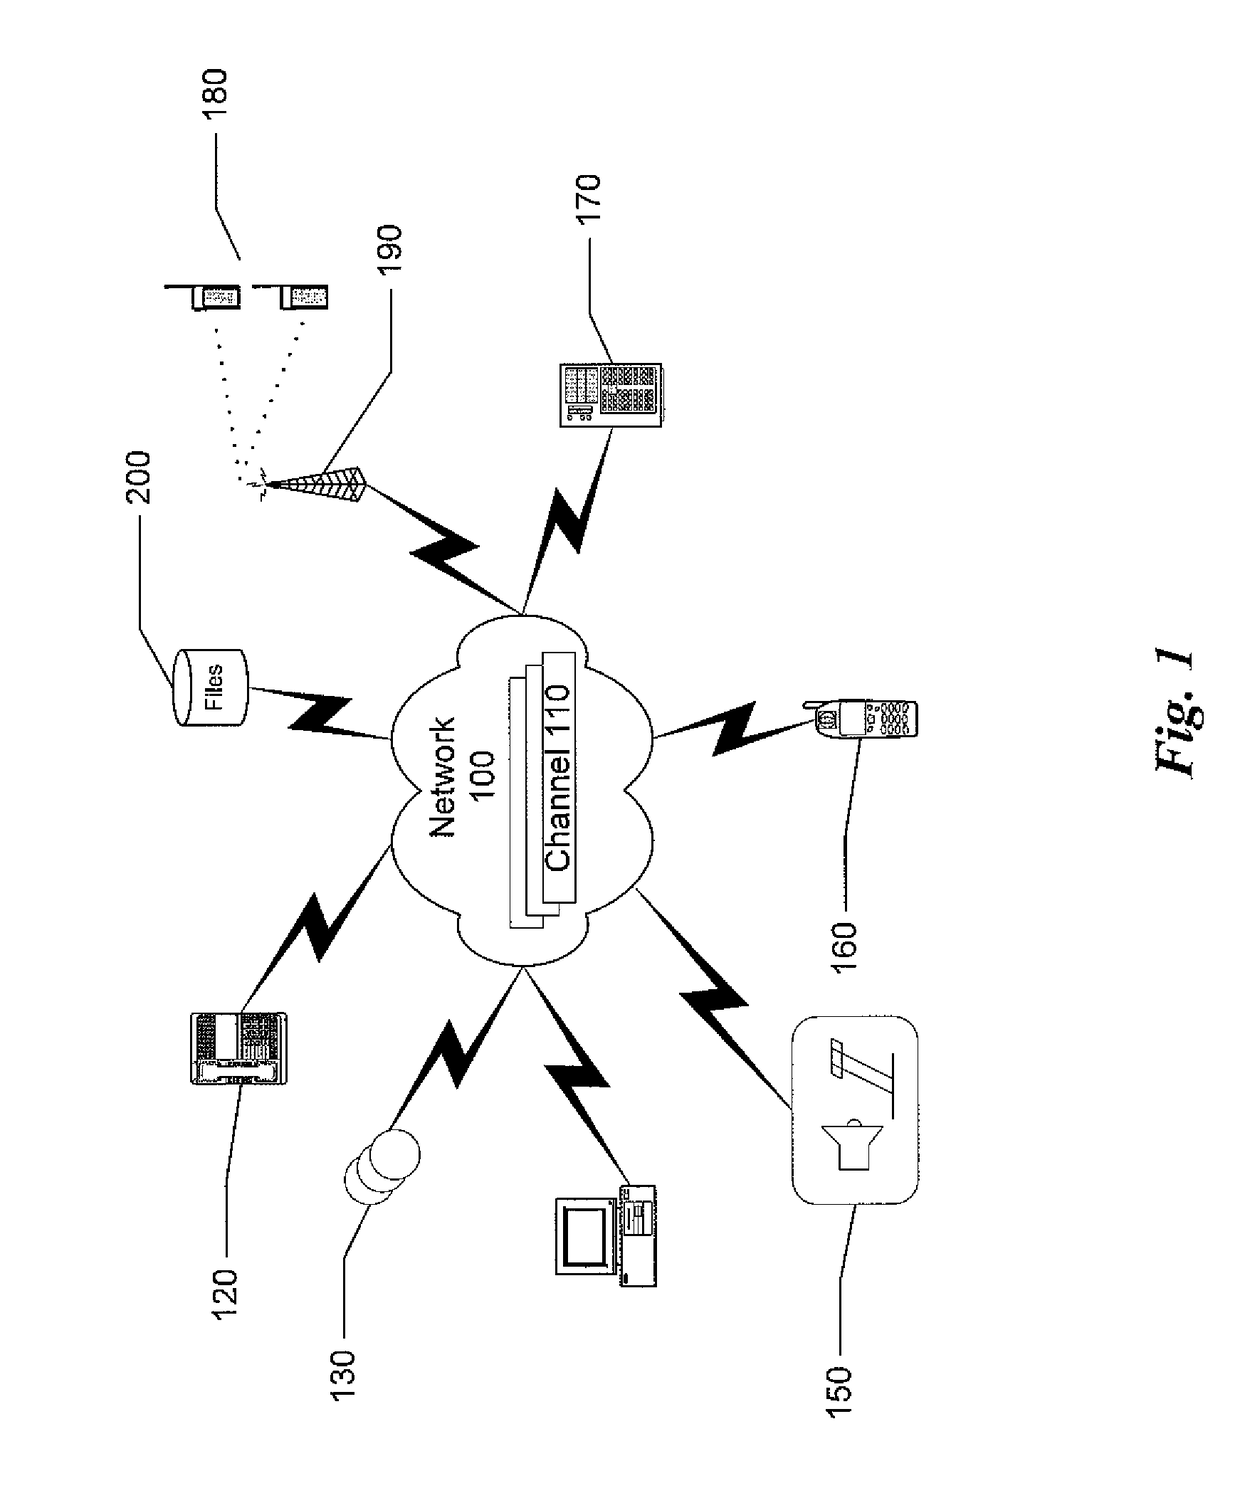 Wide area voice environment multi-channel communications system and method